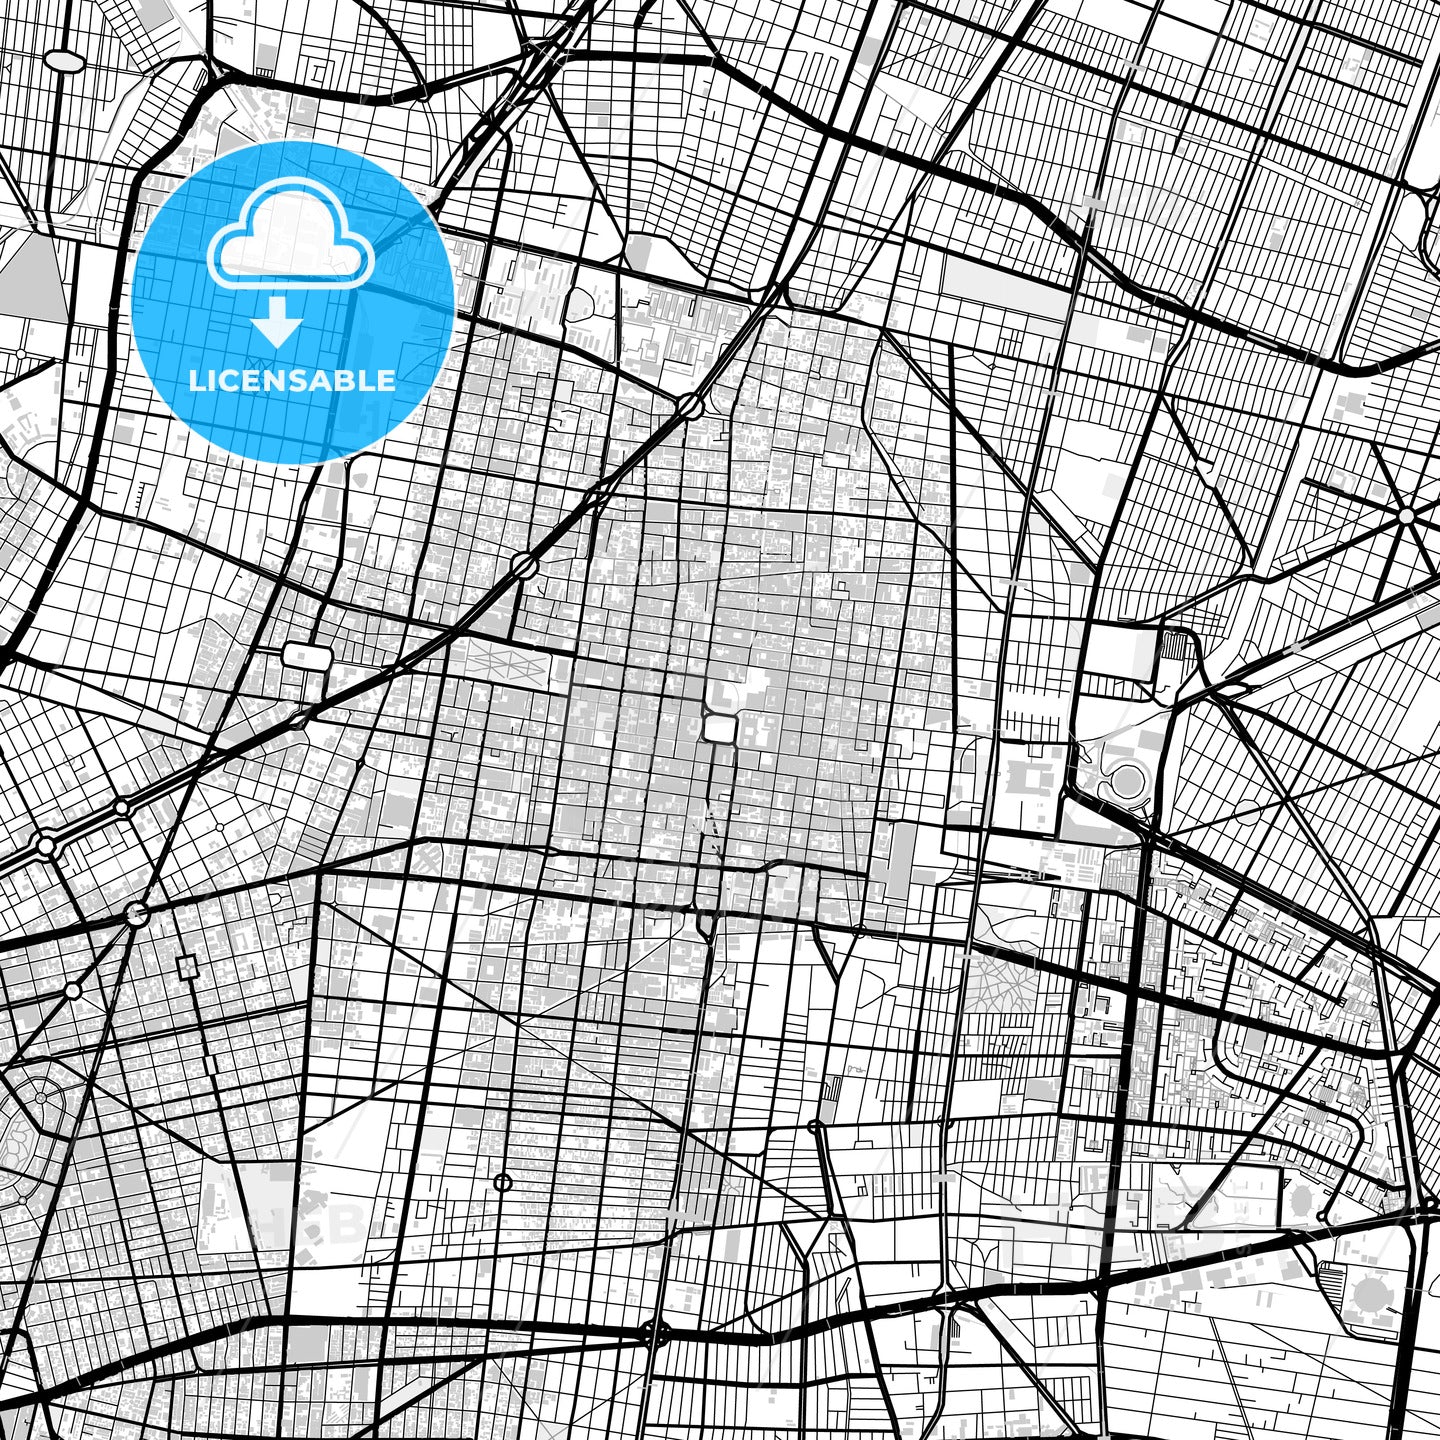 Downtown map of Mexico City, light